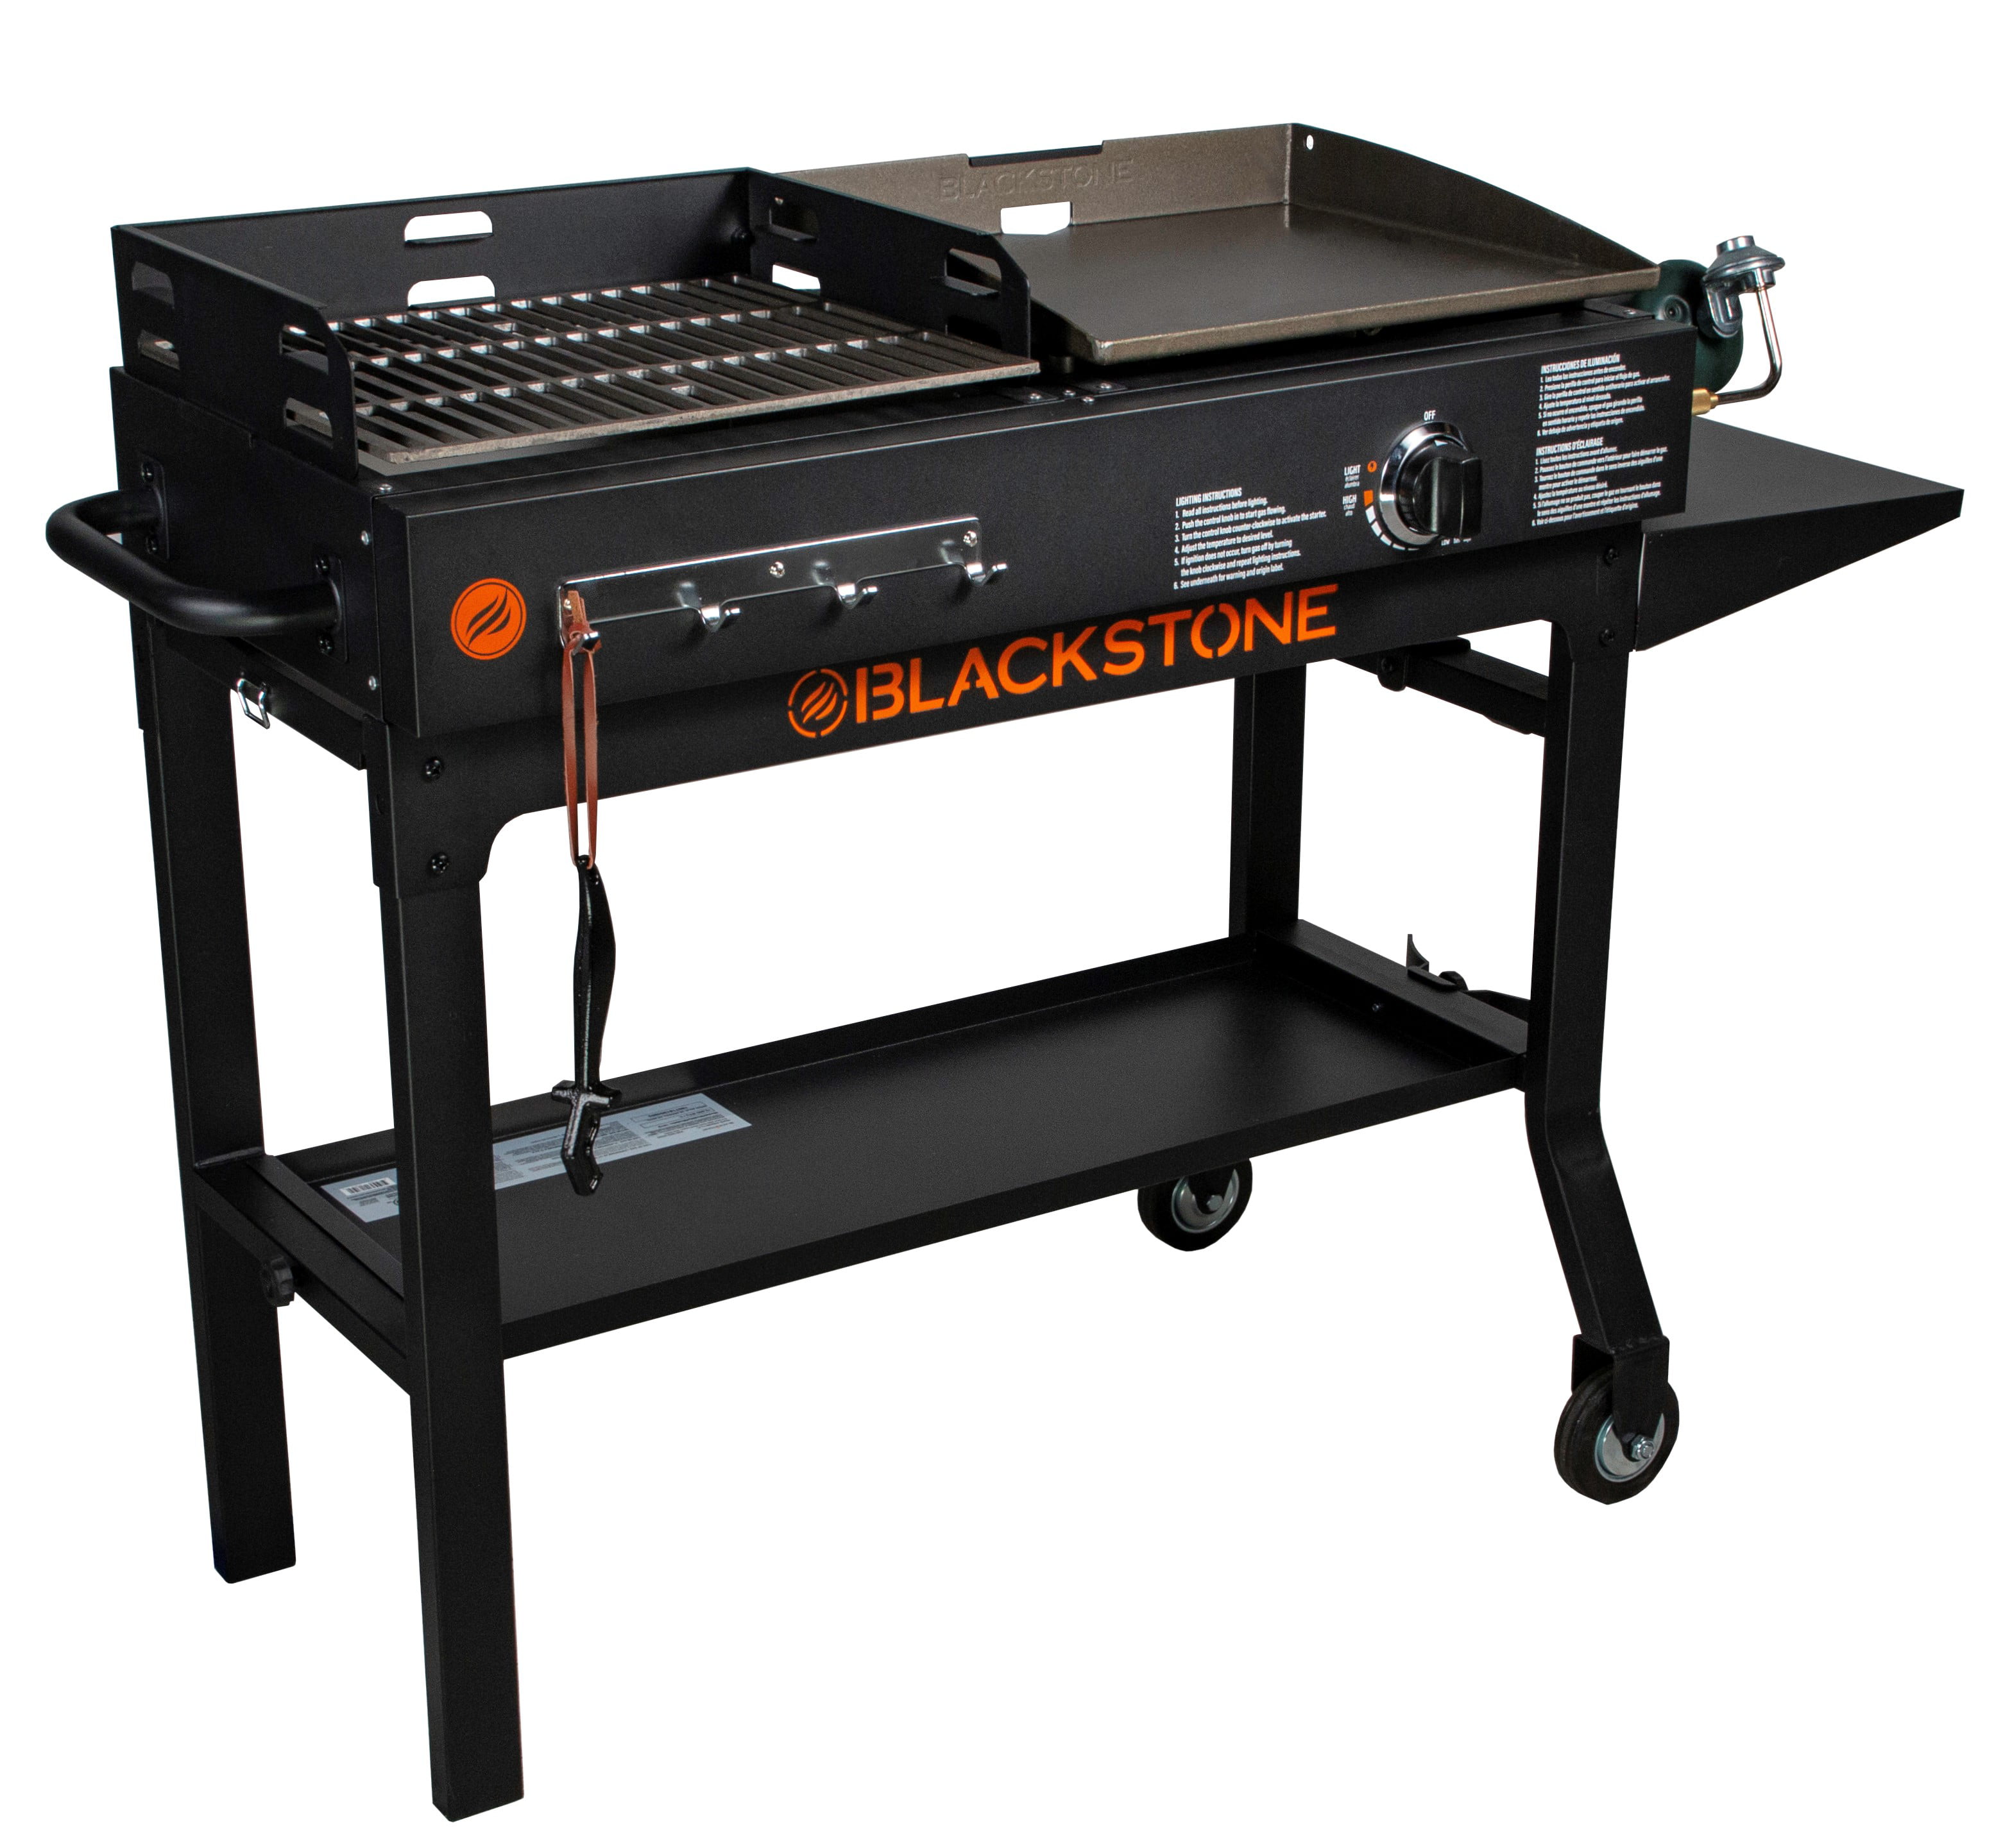 Blackstone Duo Griddle Charcoal Grill Combo Walmart Com